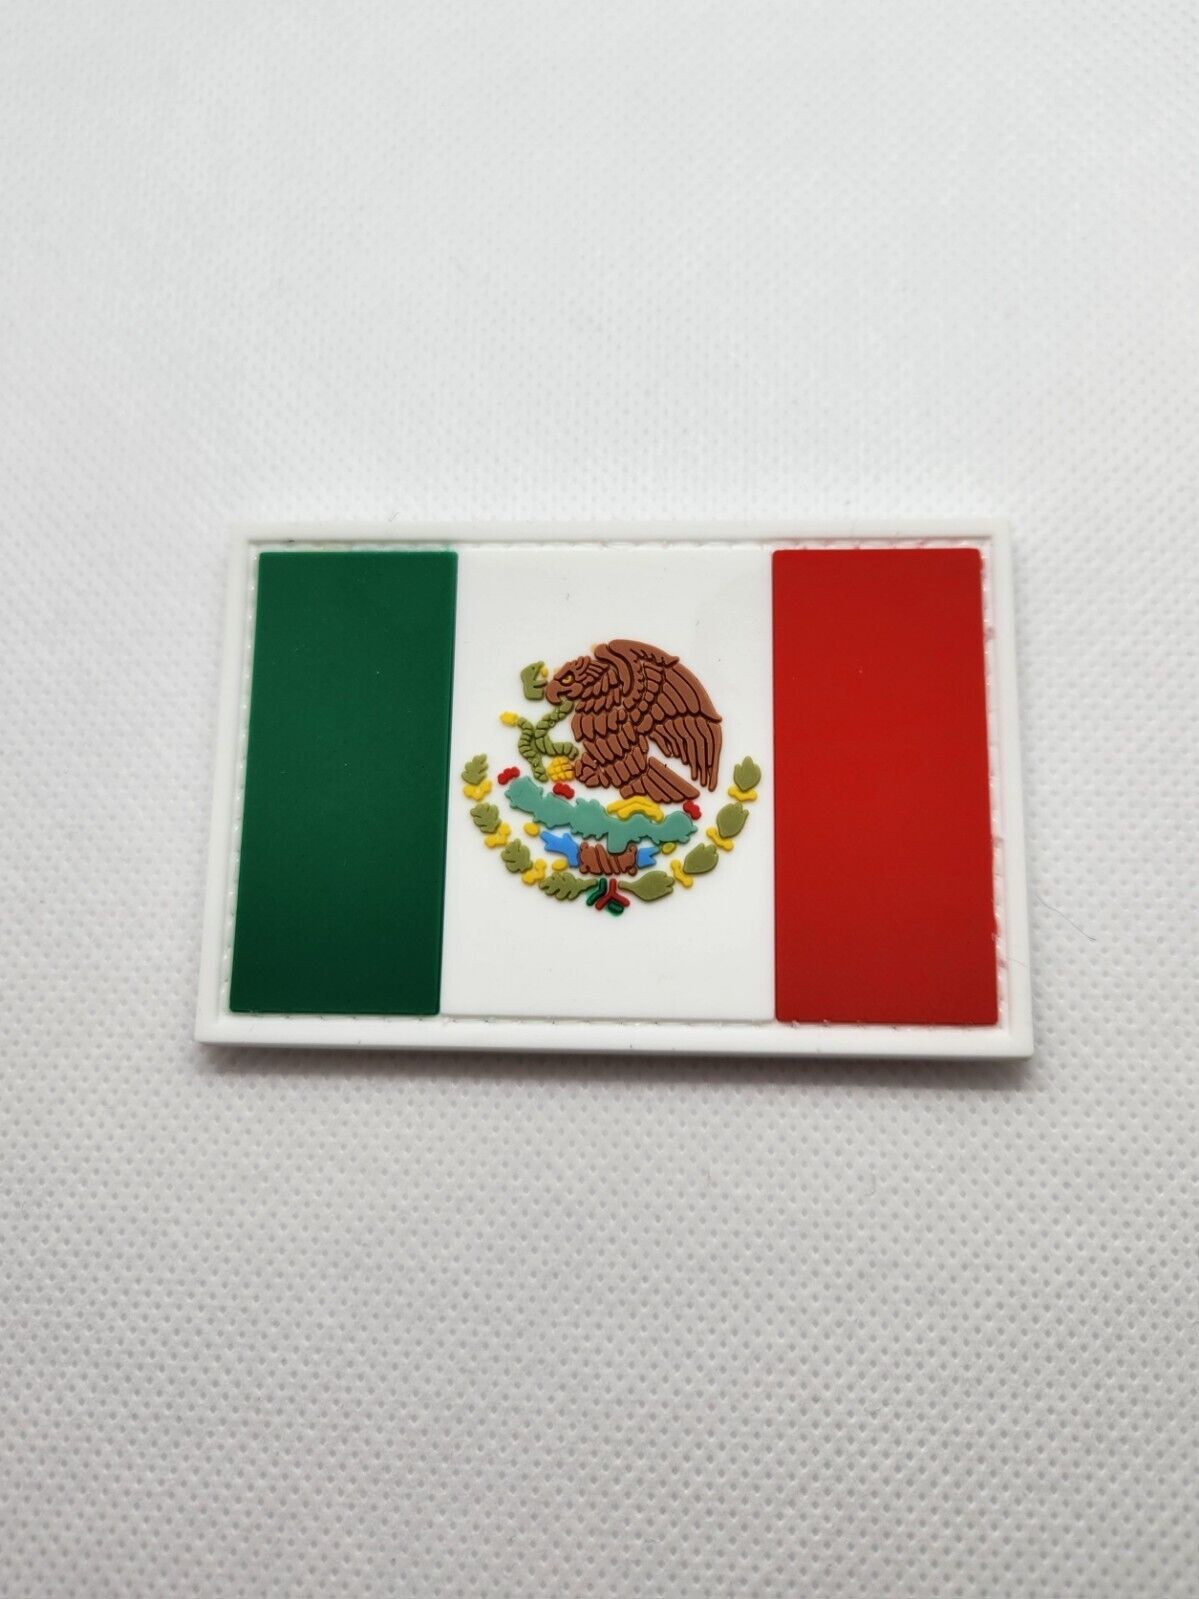 Mexico Flag 3D PVC Tactical Morale Patch – Hook Backed